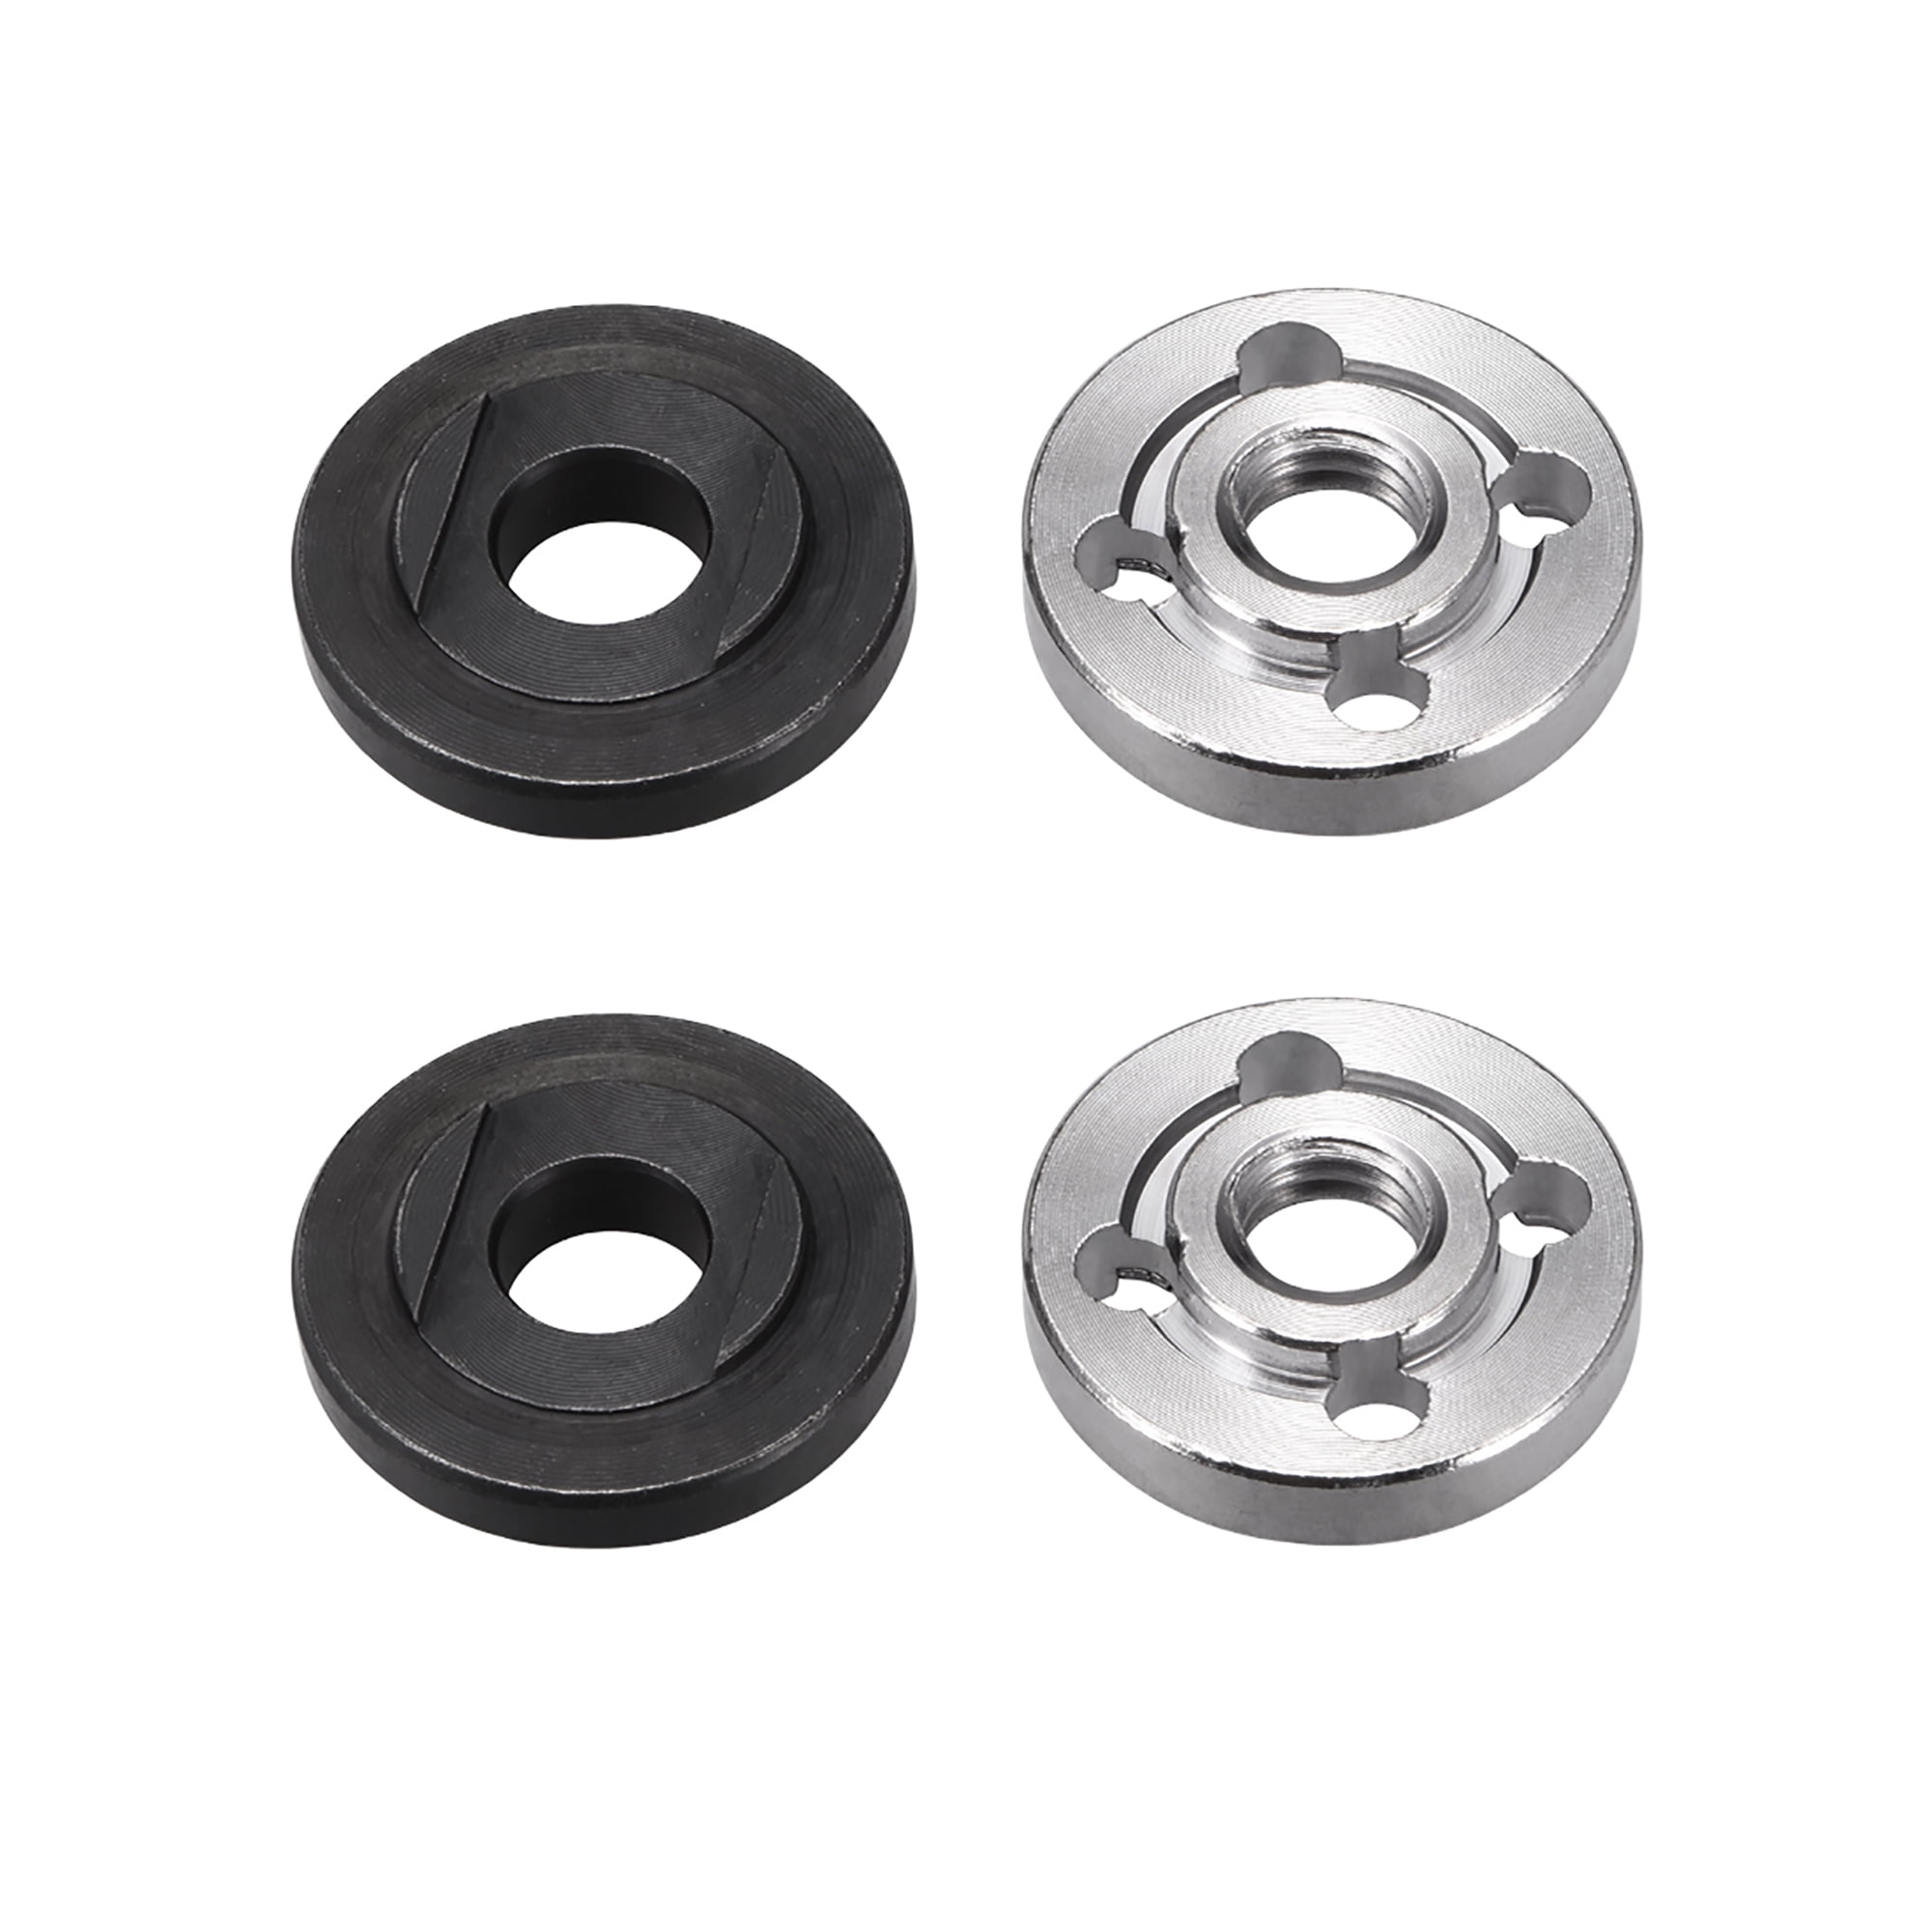 2X Replacement Angle Grinder Part Inner Outer Flange Nuts Set for Makita 9523 HG 